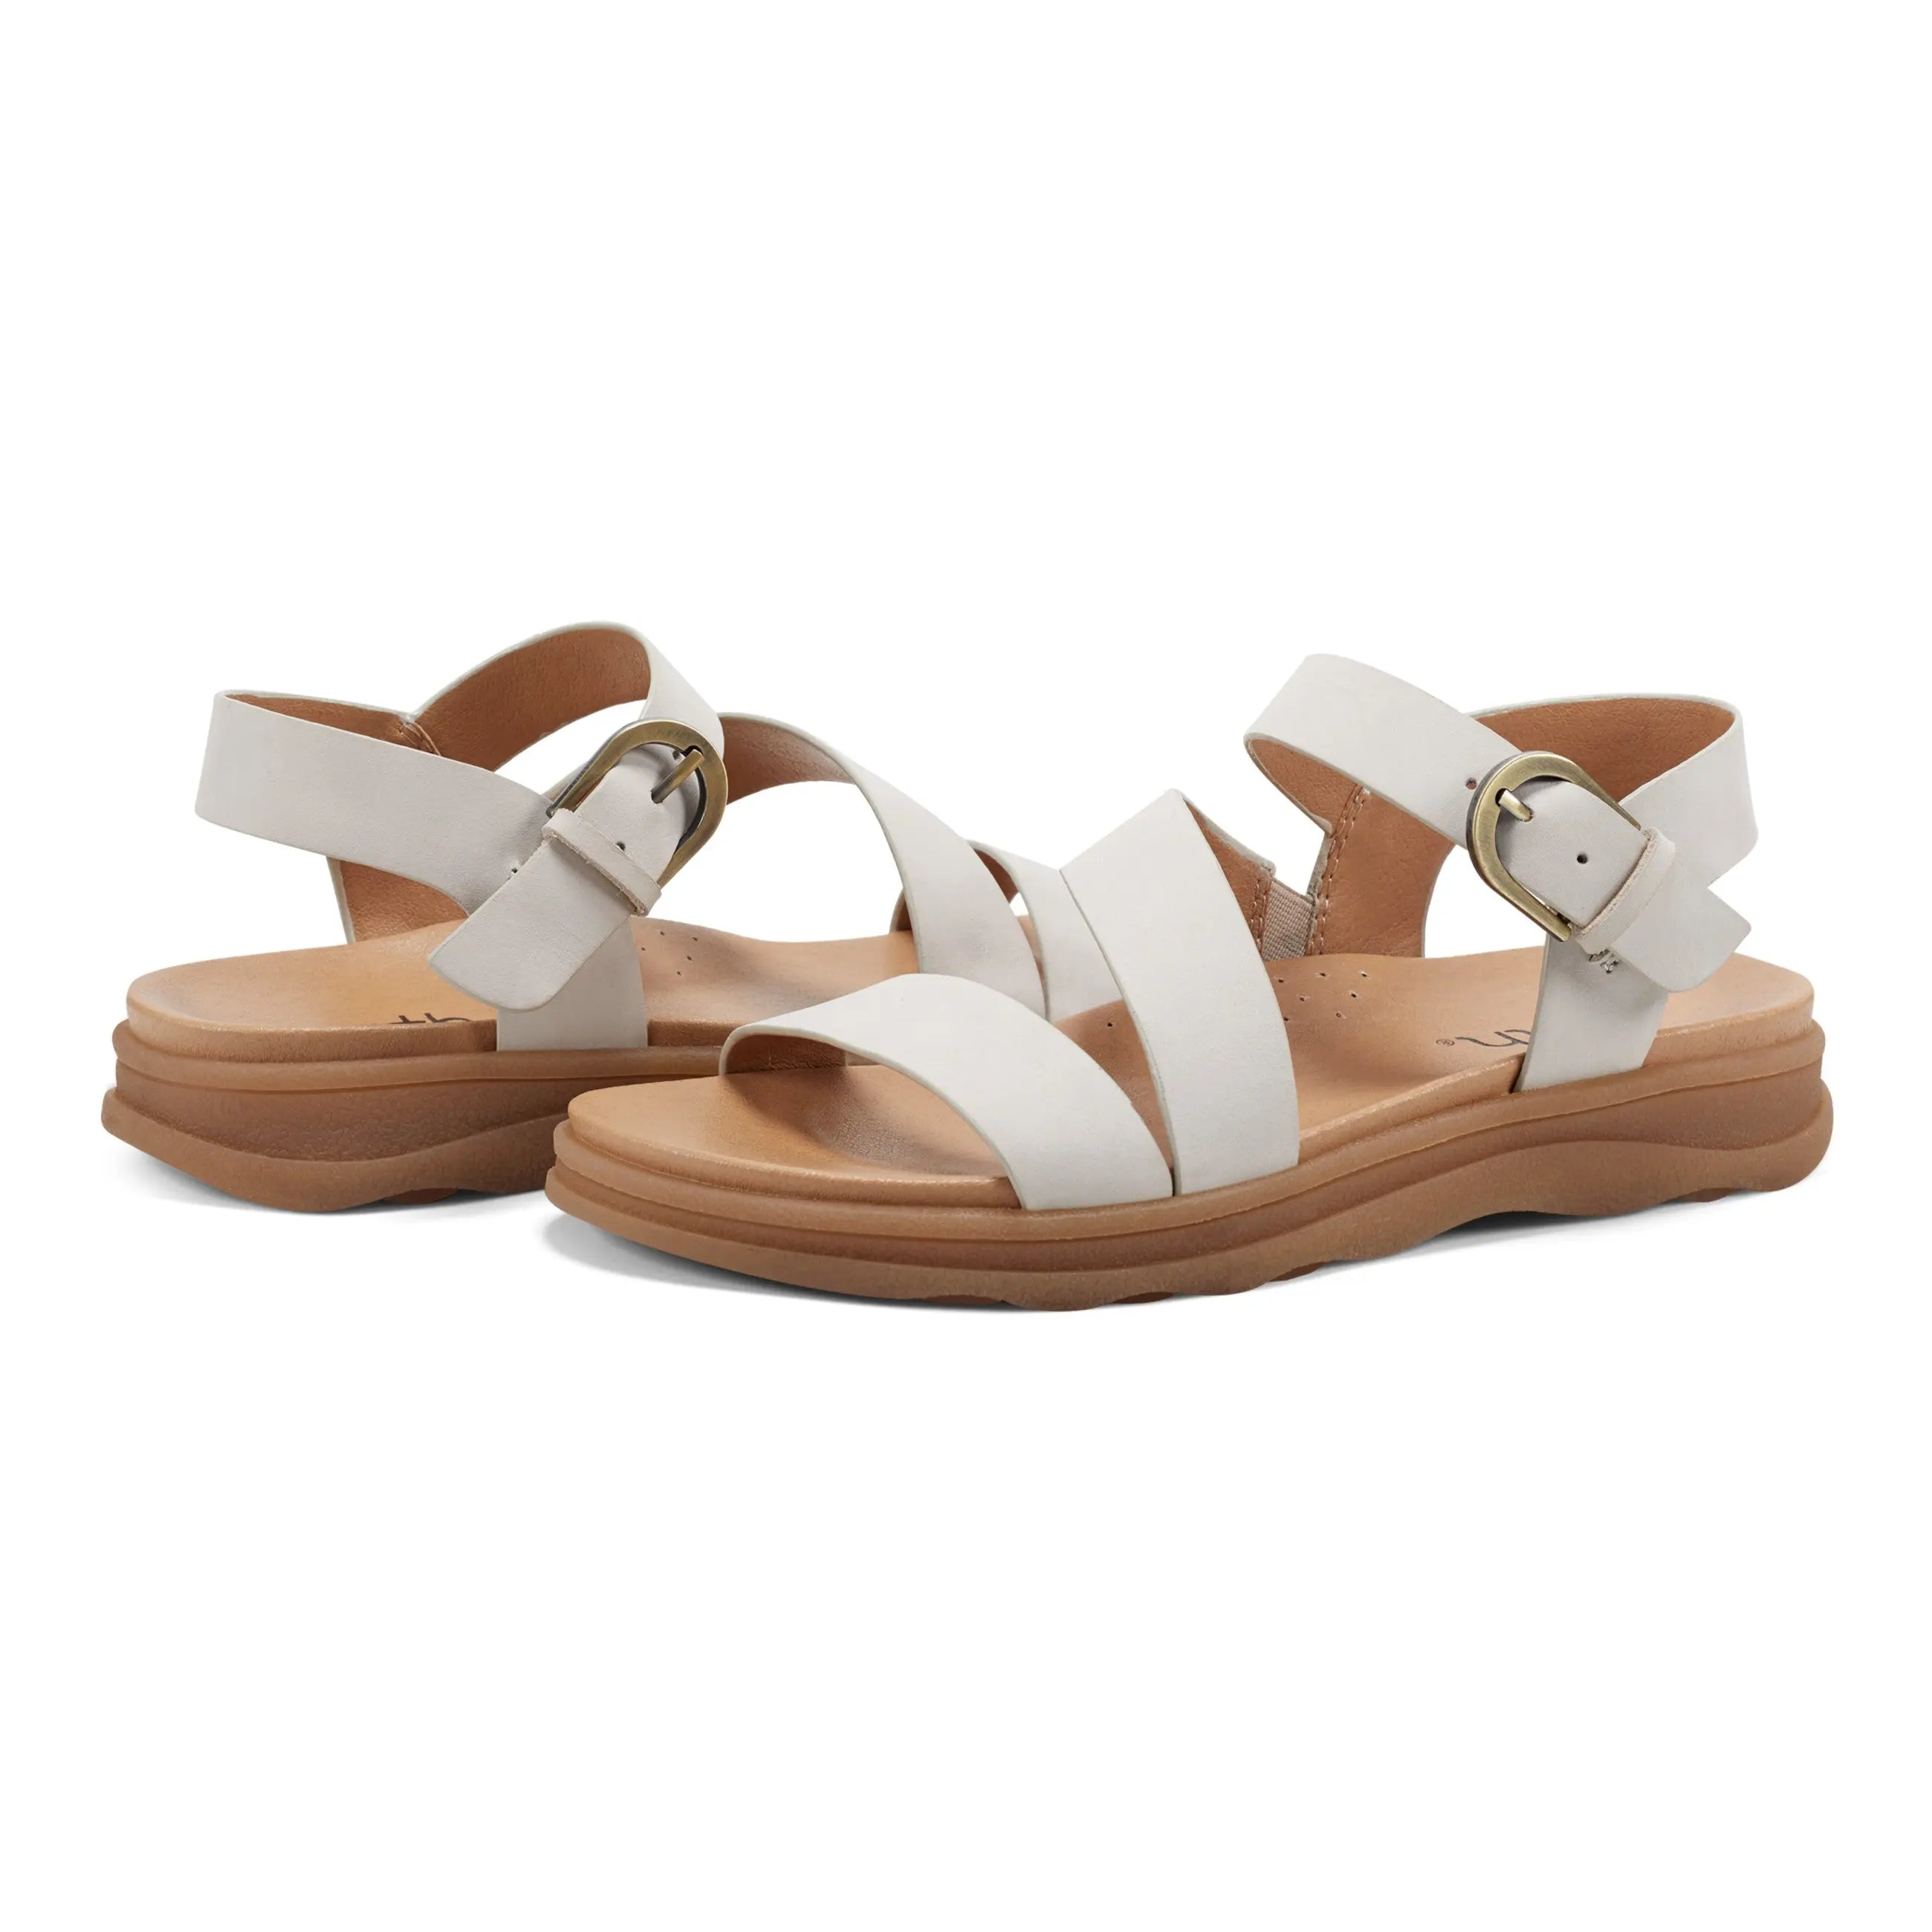 Lainey Casual Strappy Round Toe Flat Sandals